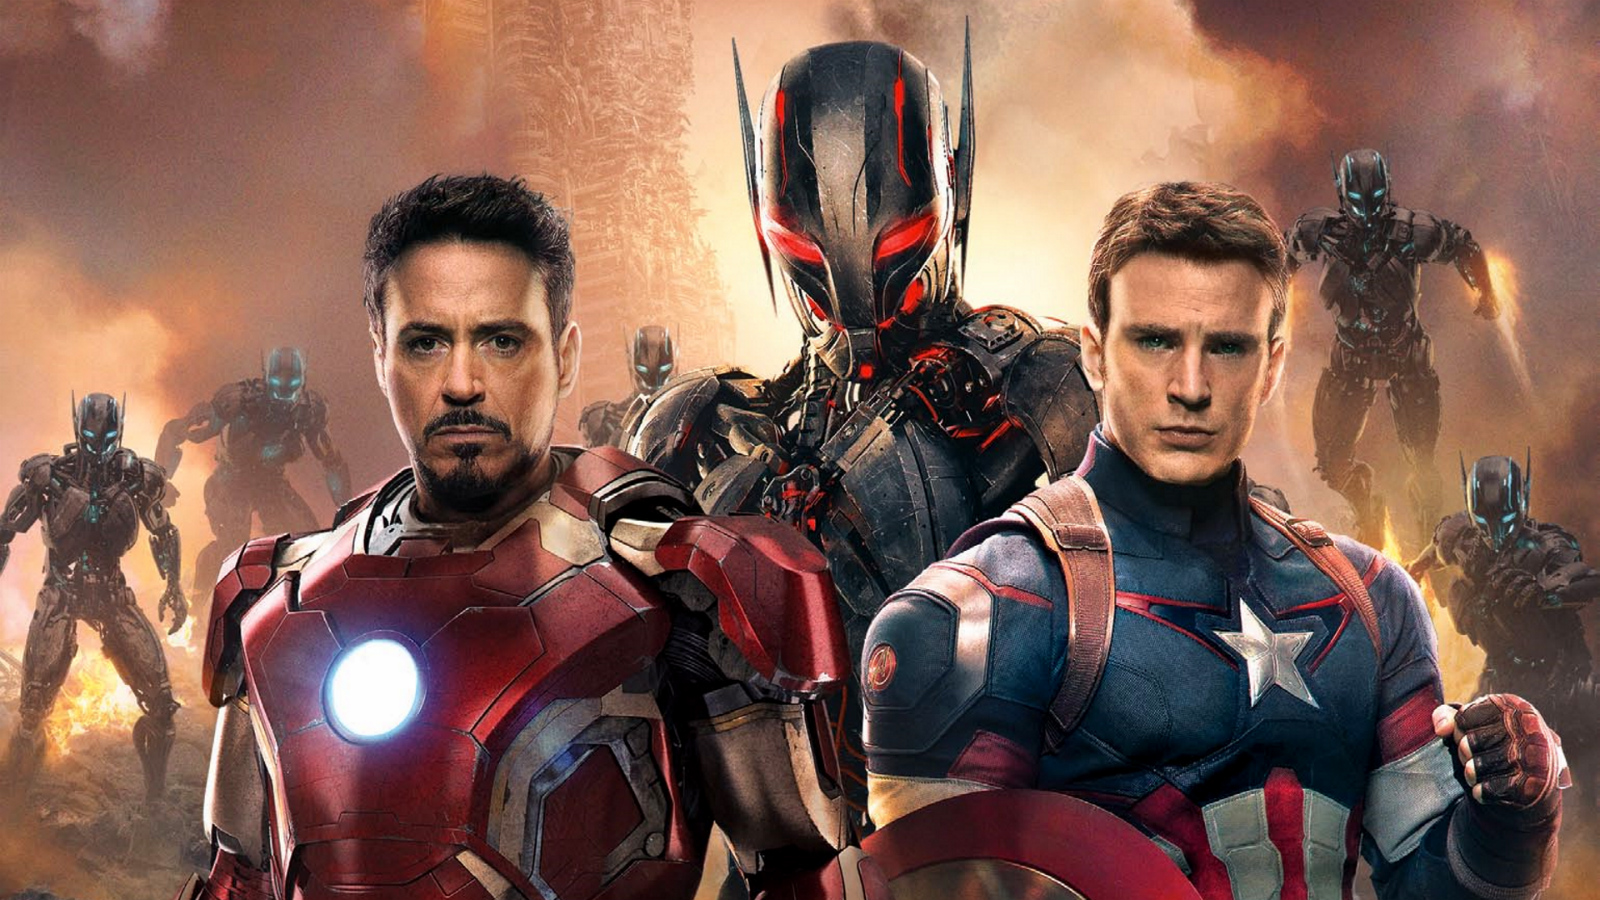 ‘Avengers: Age of Ultron’ in Review